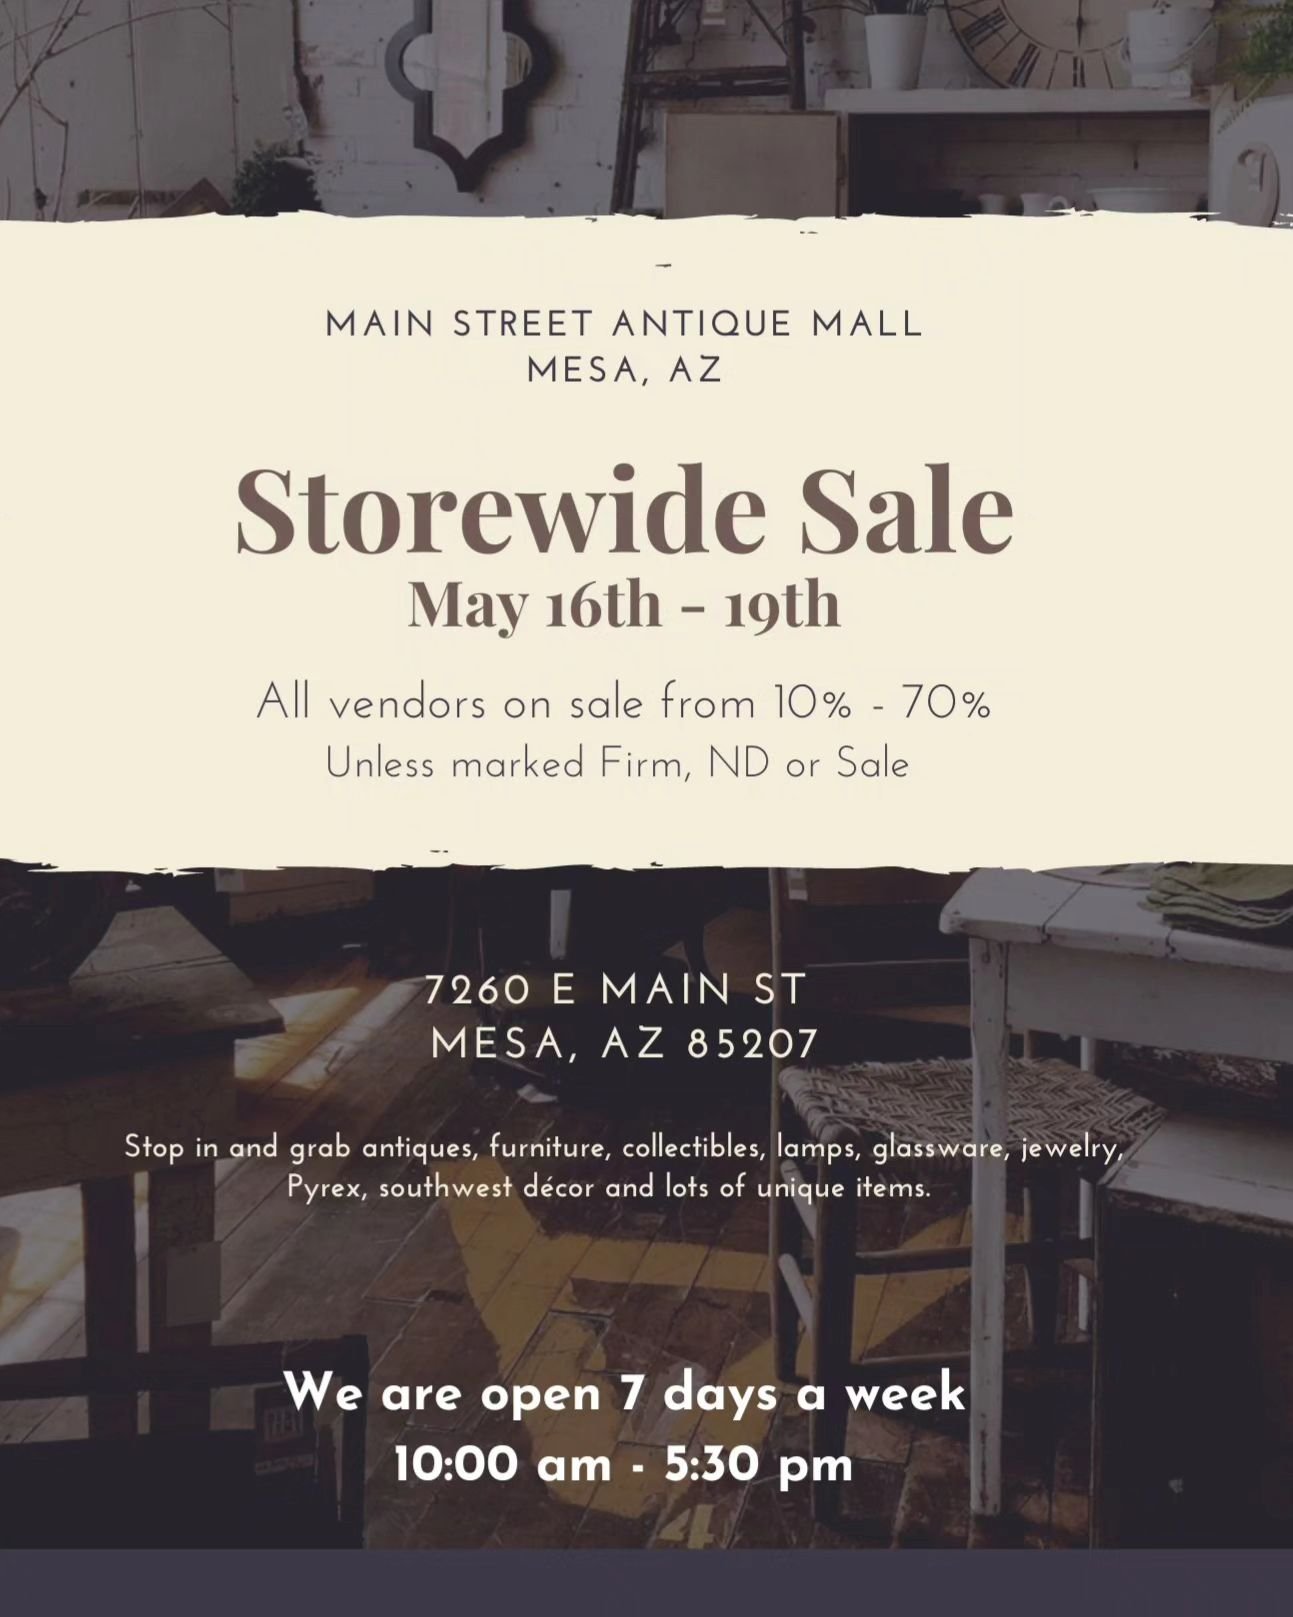 Stop in Main Street  Antique Mall and snag all the goodies you have had your eye on! 

Some vendors are already on sale. All vendors will be on sale Thursday thru Sunday!